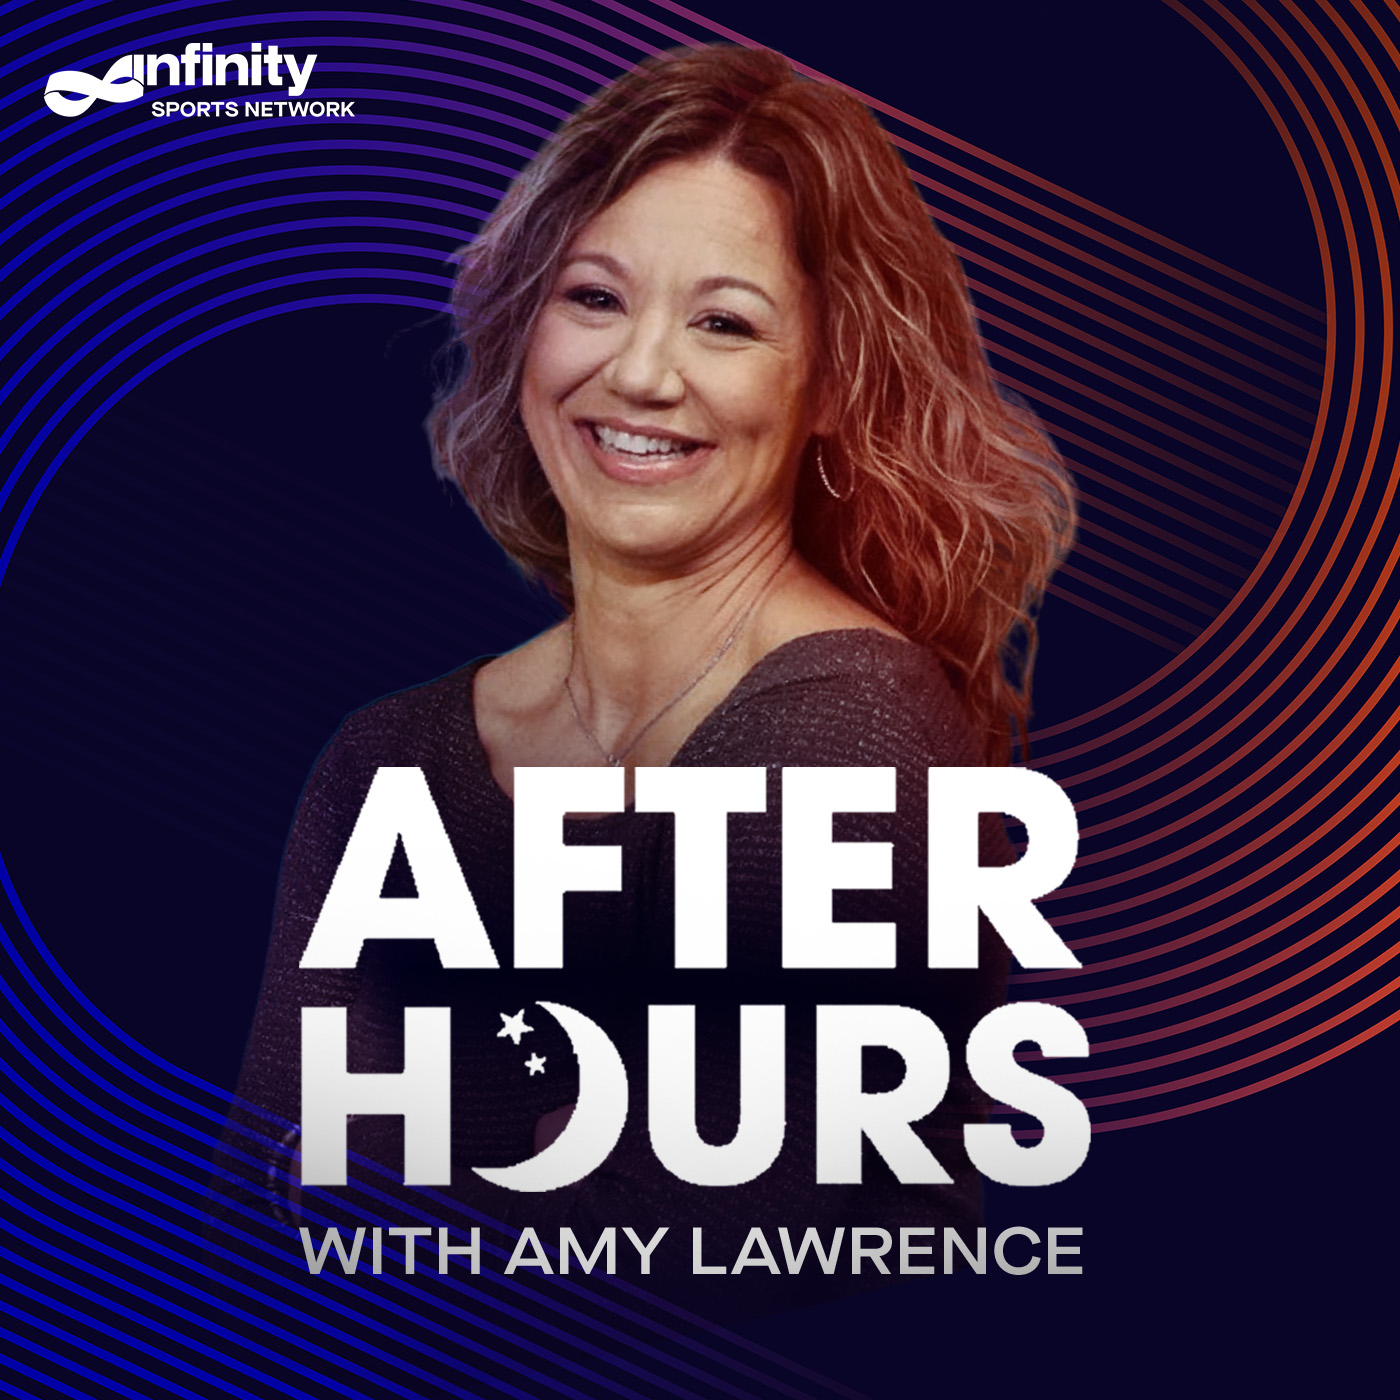 7/15/21 After Hours with Amy Lawrence PODCAST: Hour 1